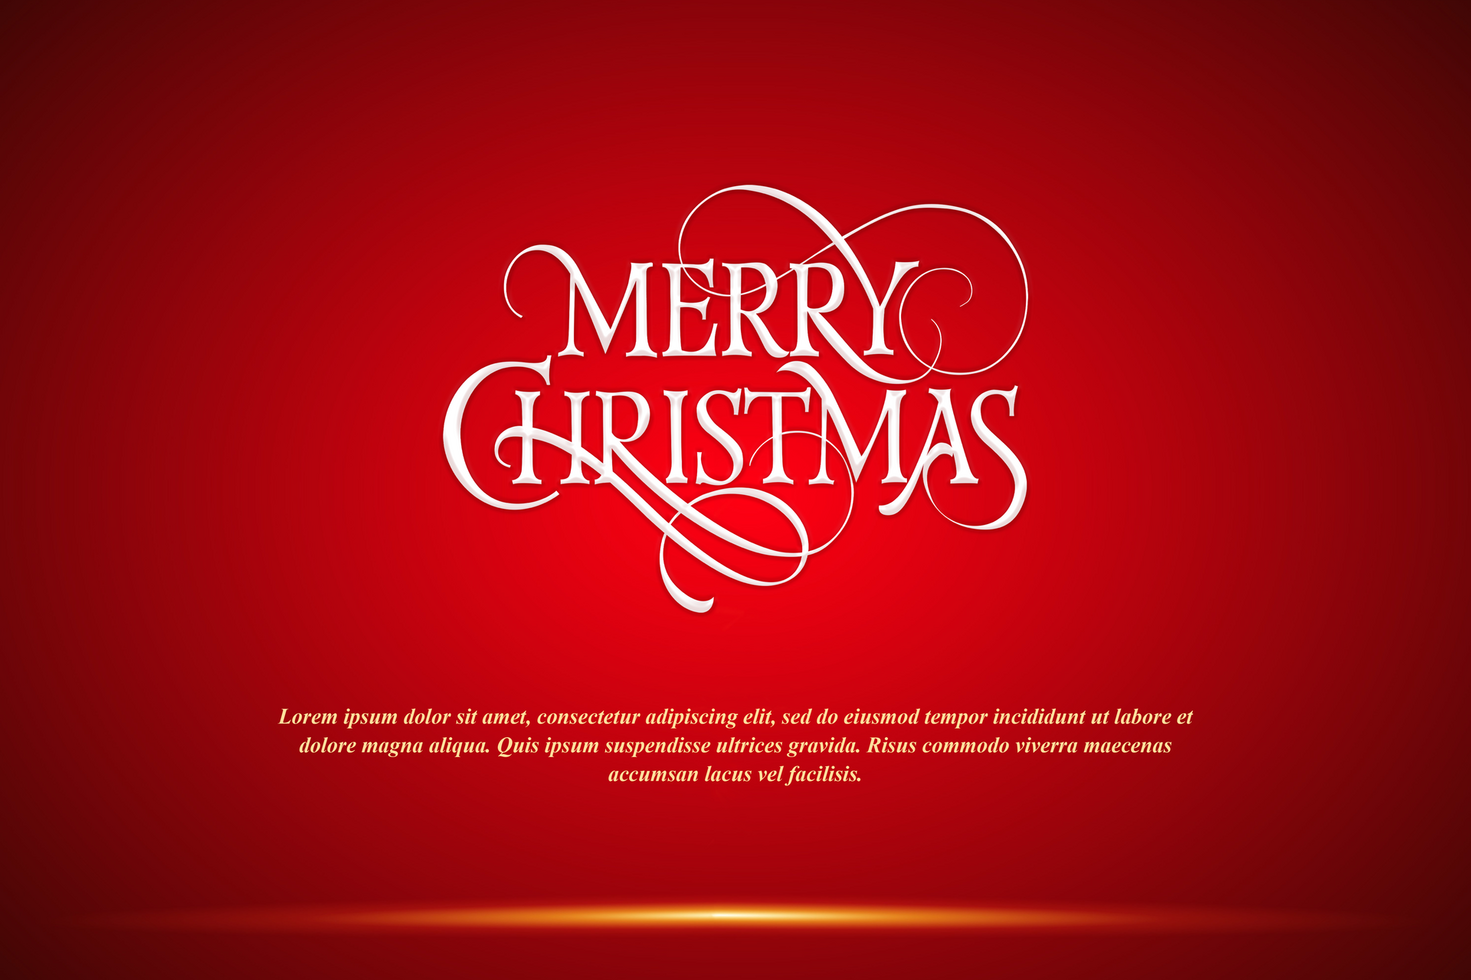 Merry Christmas Background psd